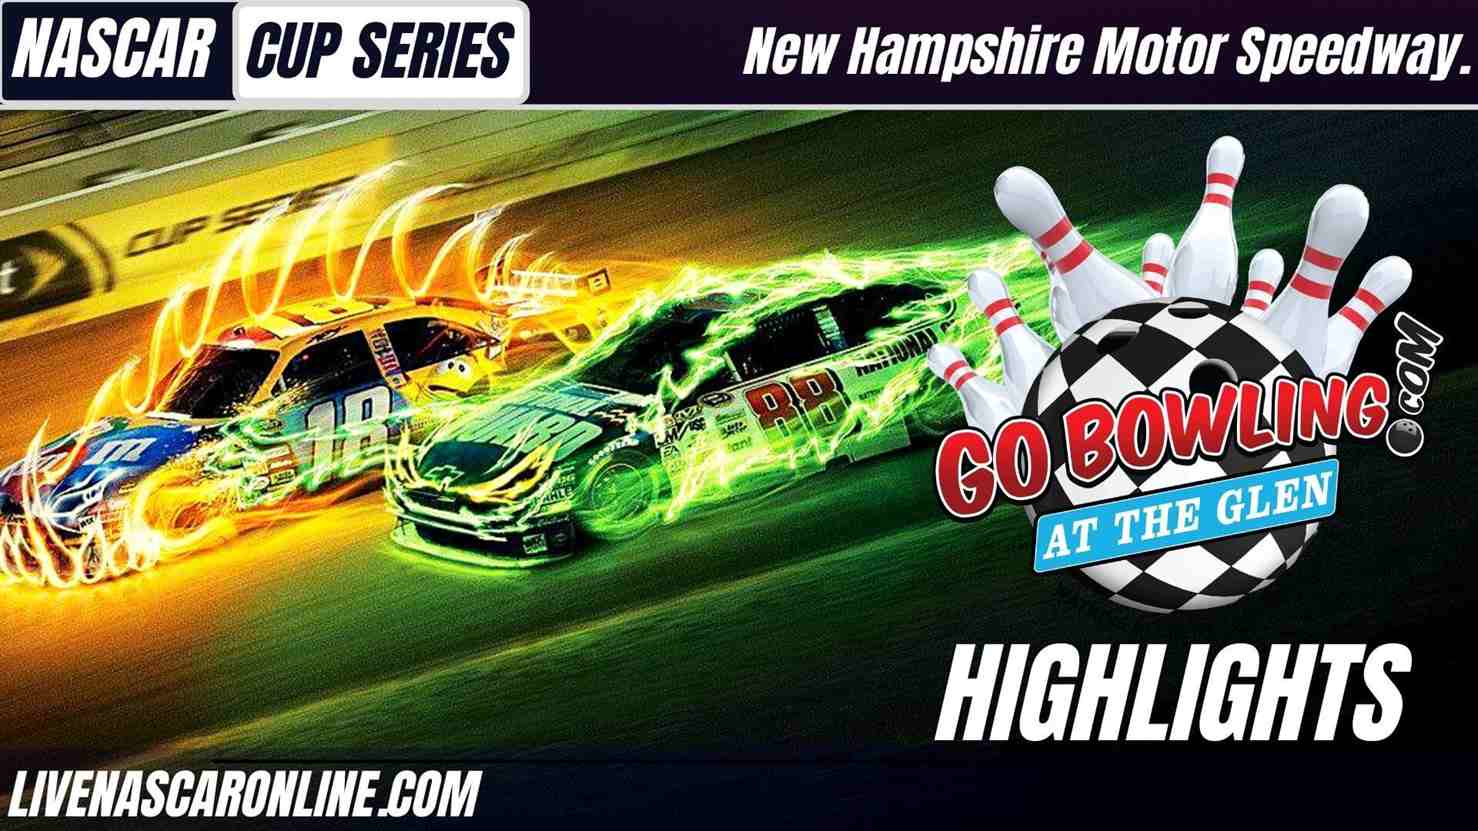 Go Bowling At The Glen Highlights 2021 Nascar Cup